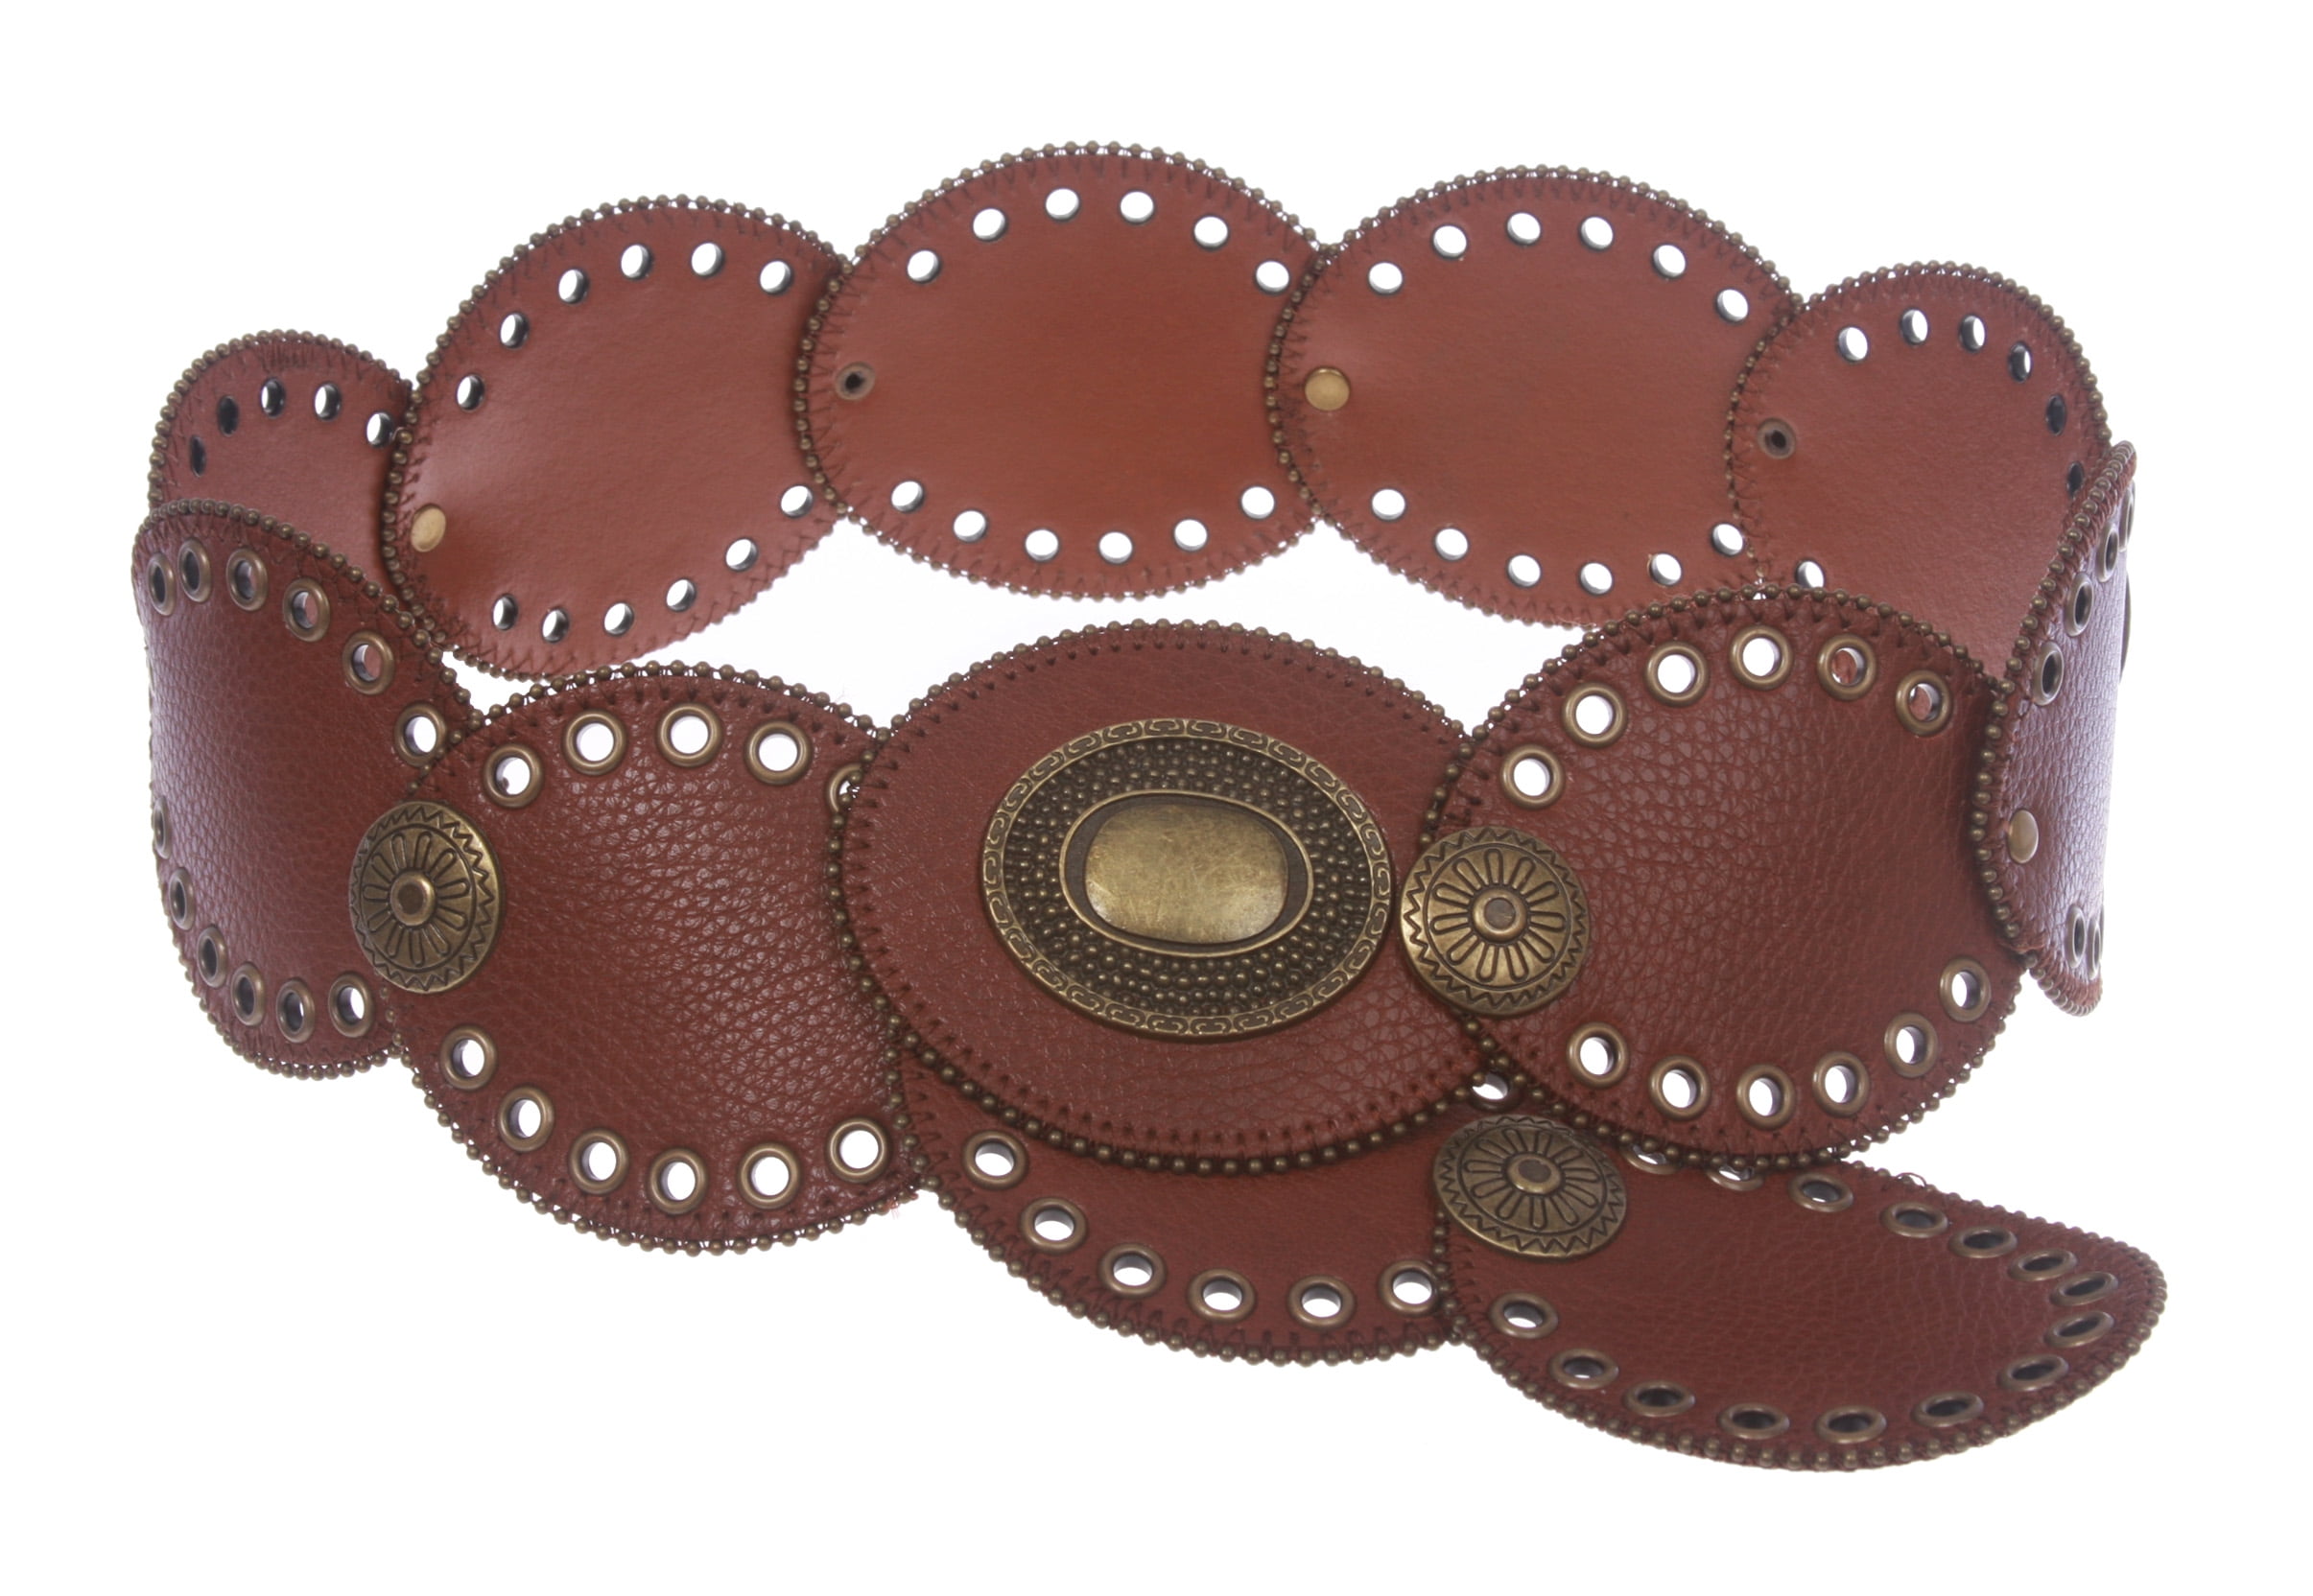 2 x Concho 1 3/4" Leather